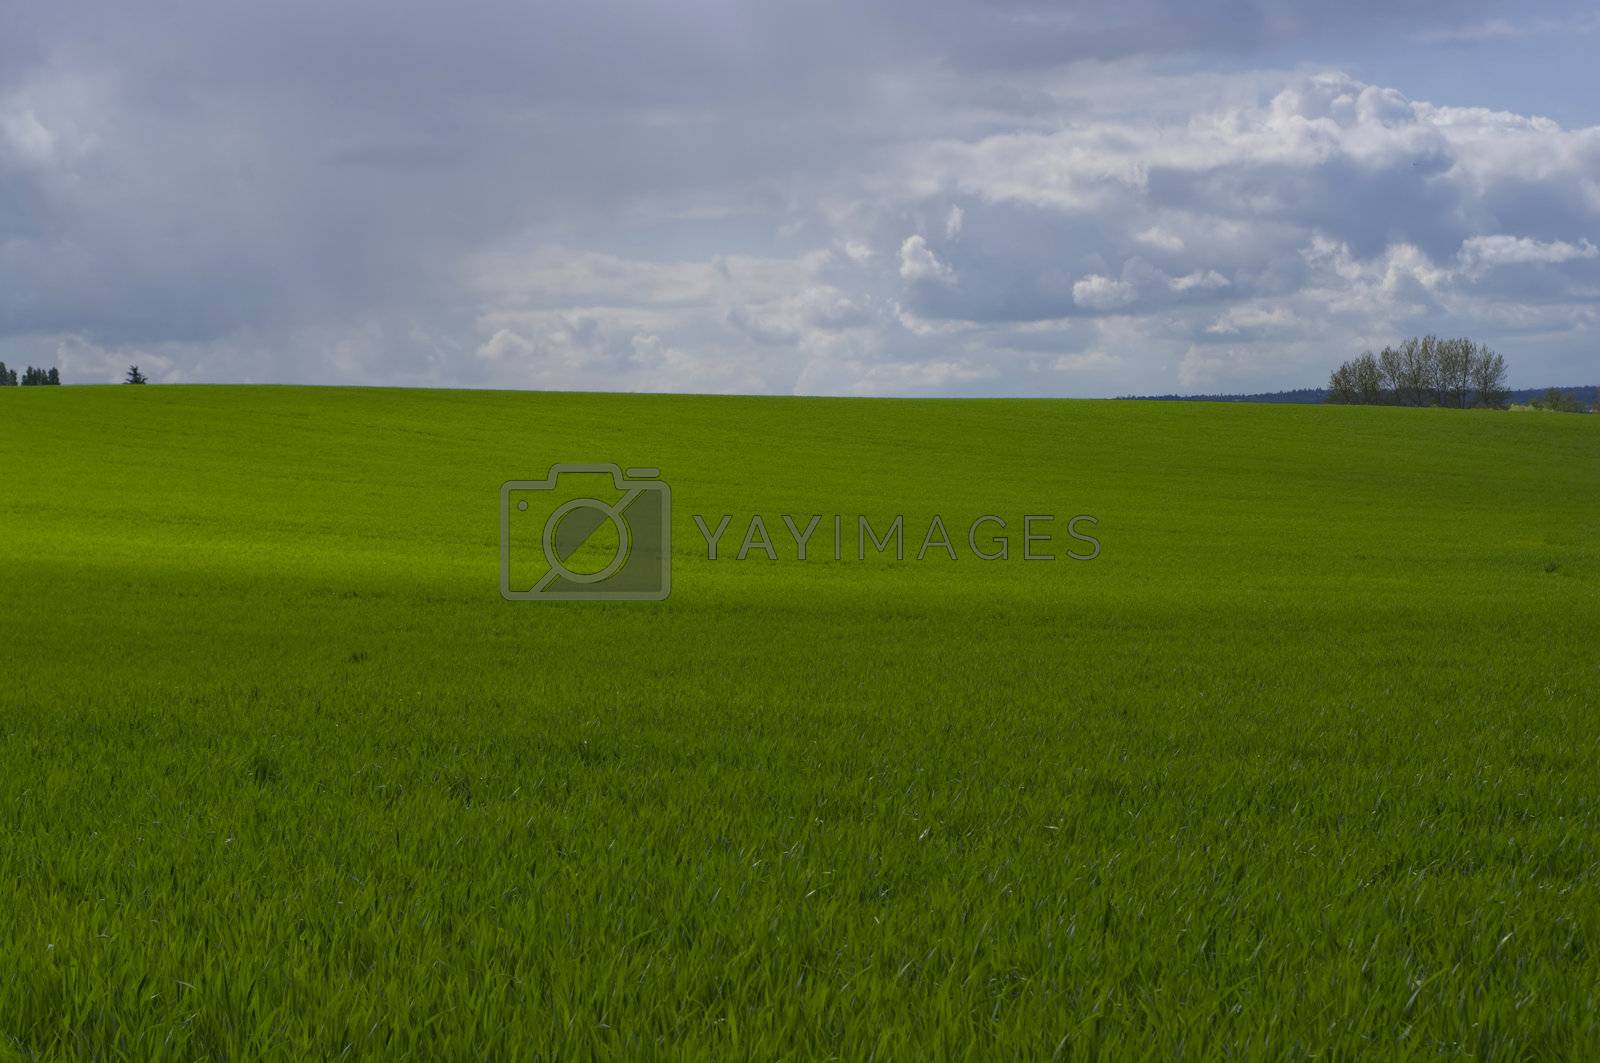 Royalty free image of Green field by Ziptou